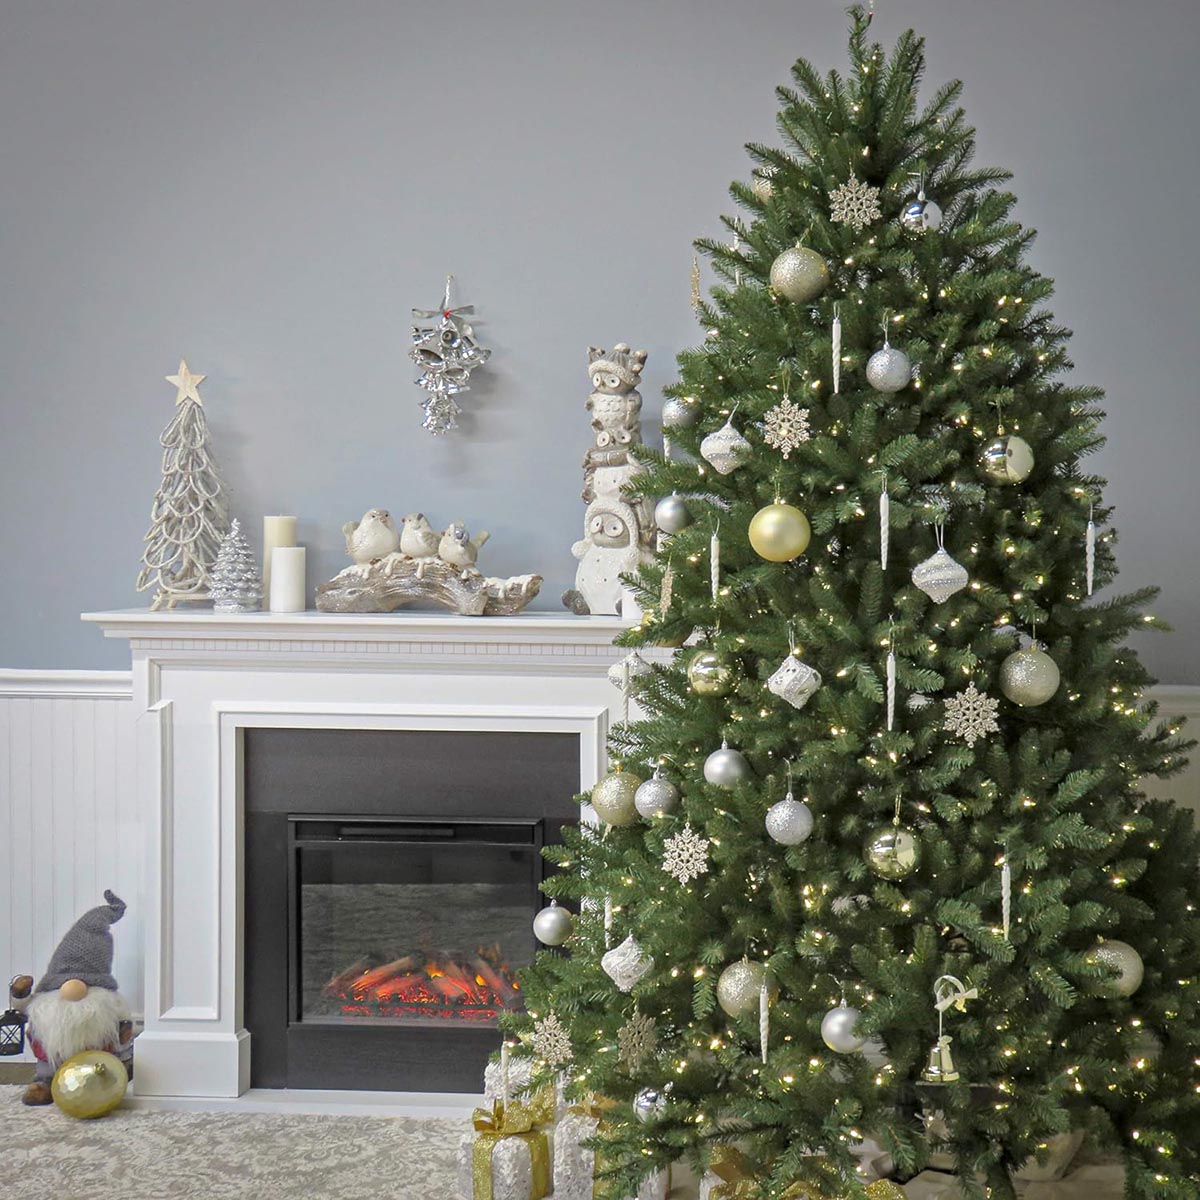 The National Tree Company Dunhill Fir Christmas Tree decorated with silver and gold ornaments and set up in front of a fire burning in a fireplace.